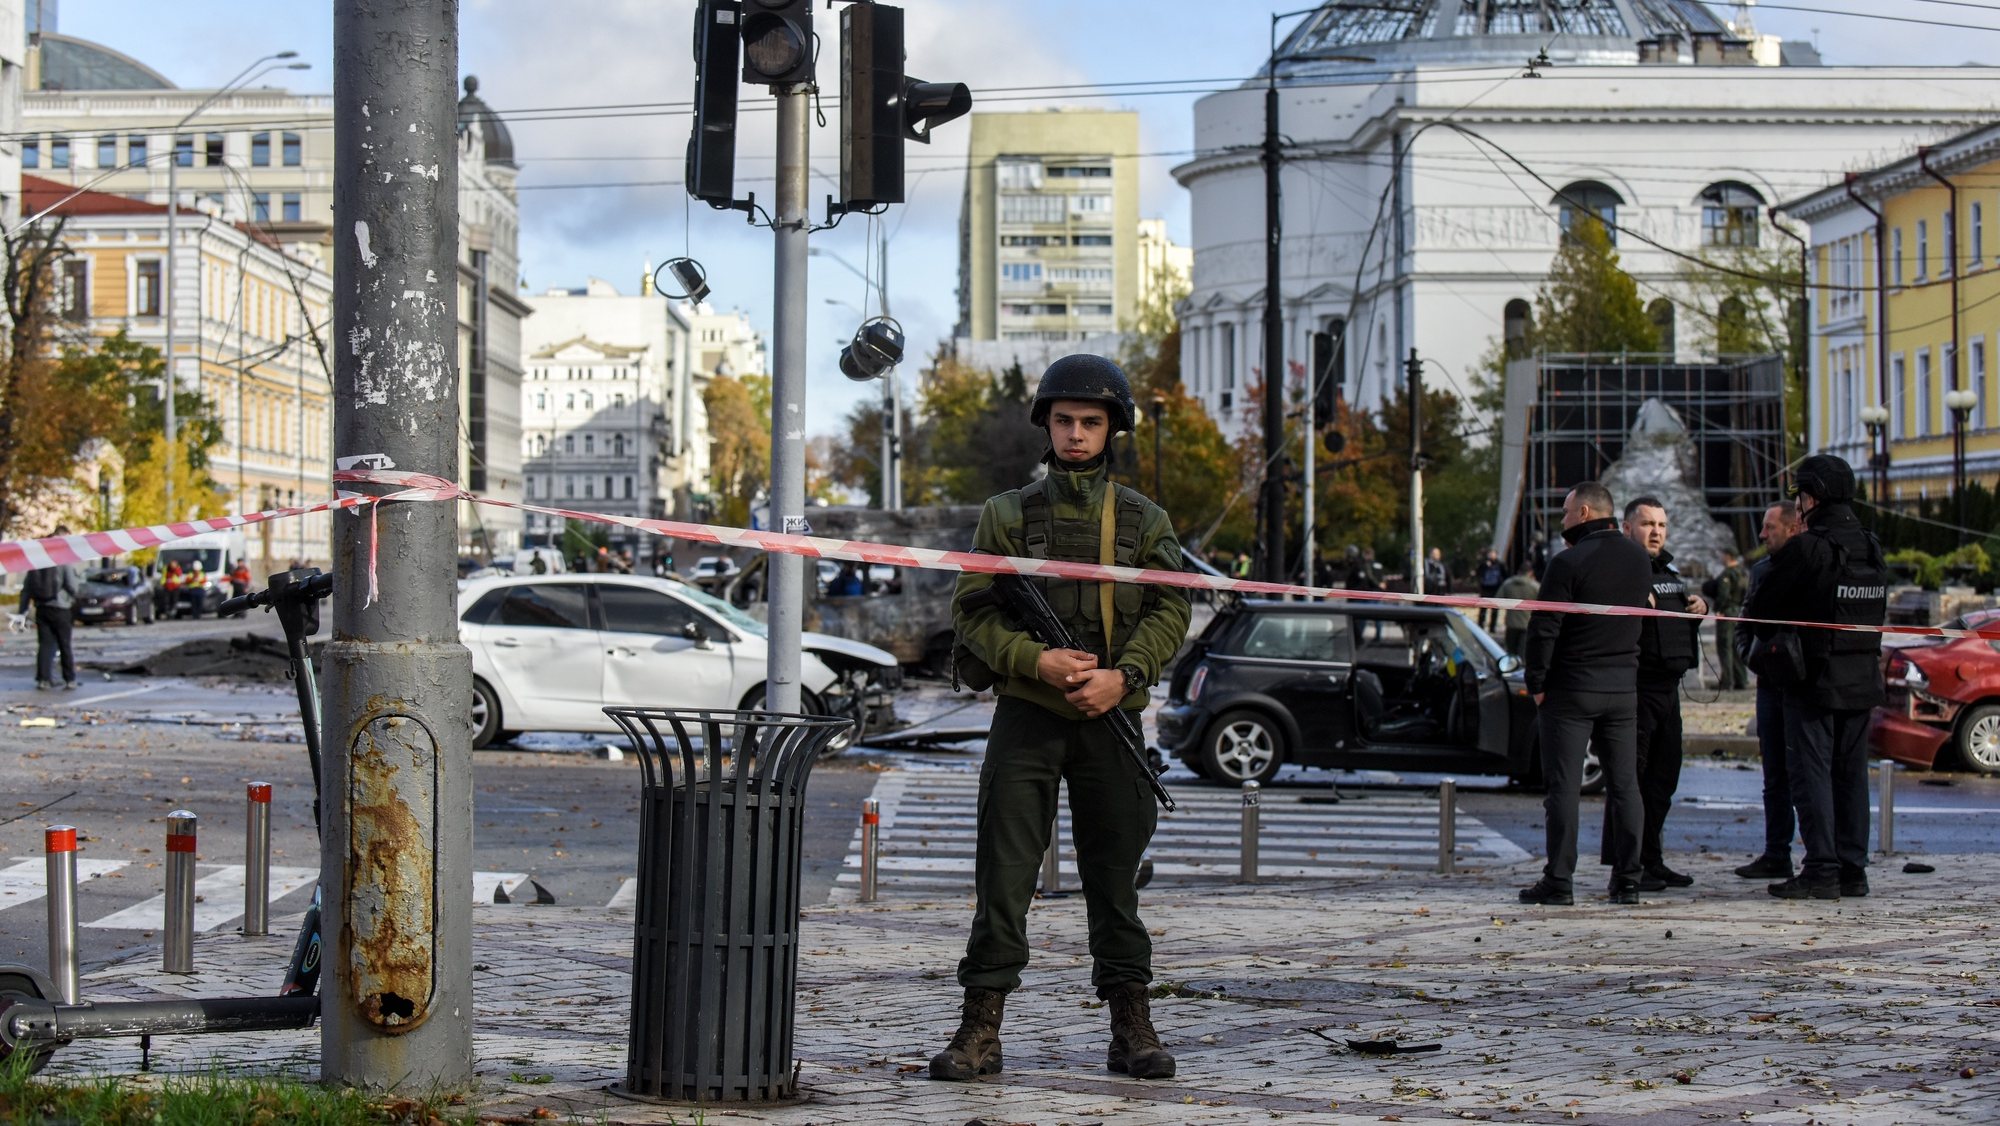 epa10234169 A police officer stands guard near a site of shelling in downtown Kyiv (Kiev), Ukraine, 10 October 2022. Explosions have been reported in several districts of the Ukrainian capital Kyiv on 10 October, with rescuers extinguishing fires and helping the victims among the civilian population, the State Emergency Service (SES) of Ukraine said. Russian troops entered Ukraine on 24 February 2022 starting a conflict that has provoked destruction and a humanitarian crisis.  EPA/OLEG PETRASYUK